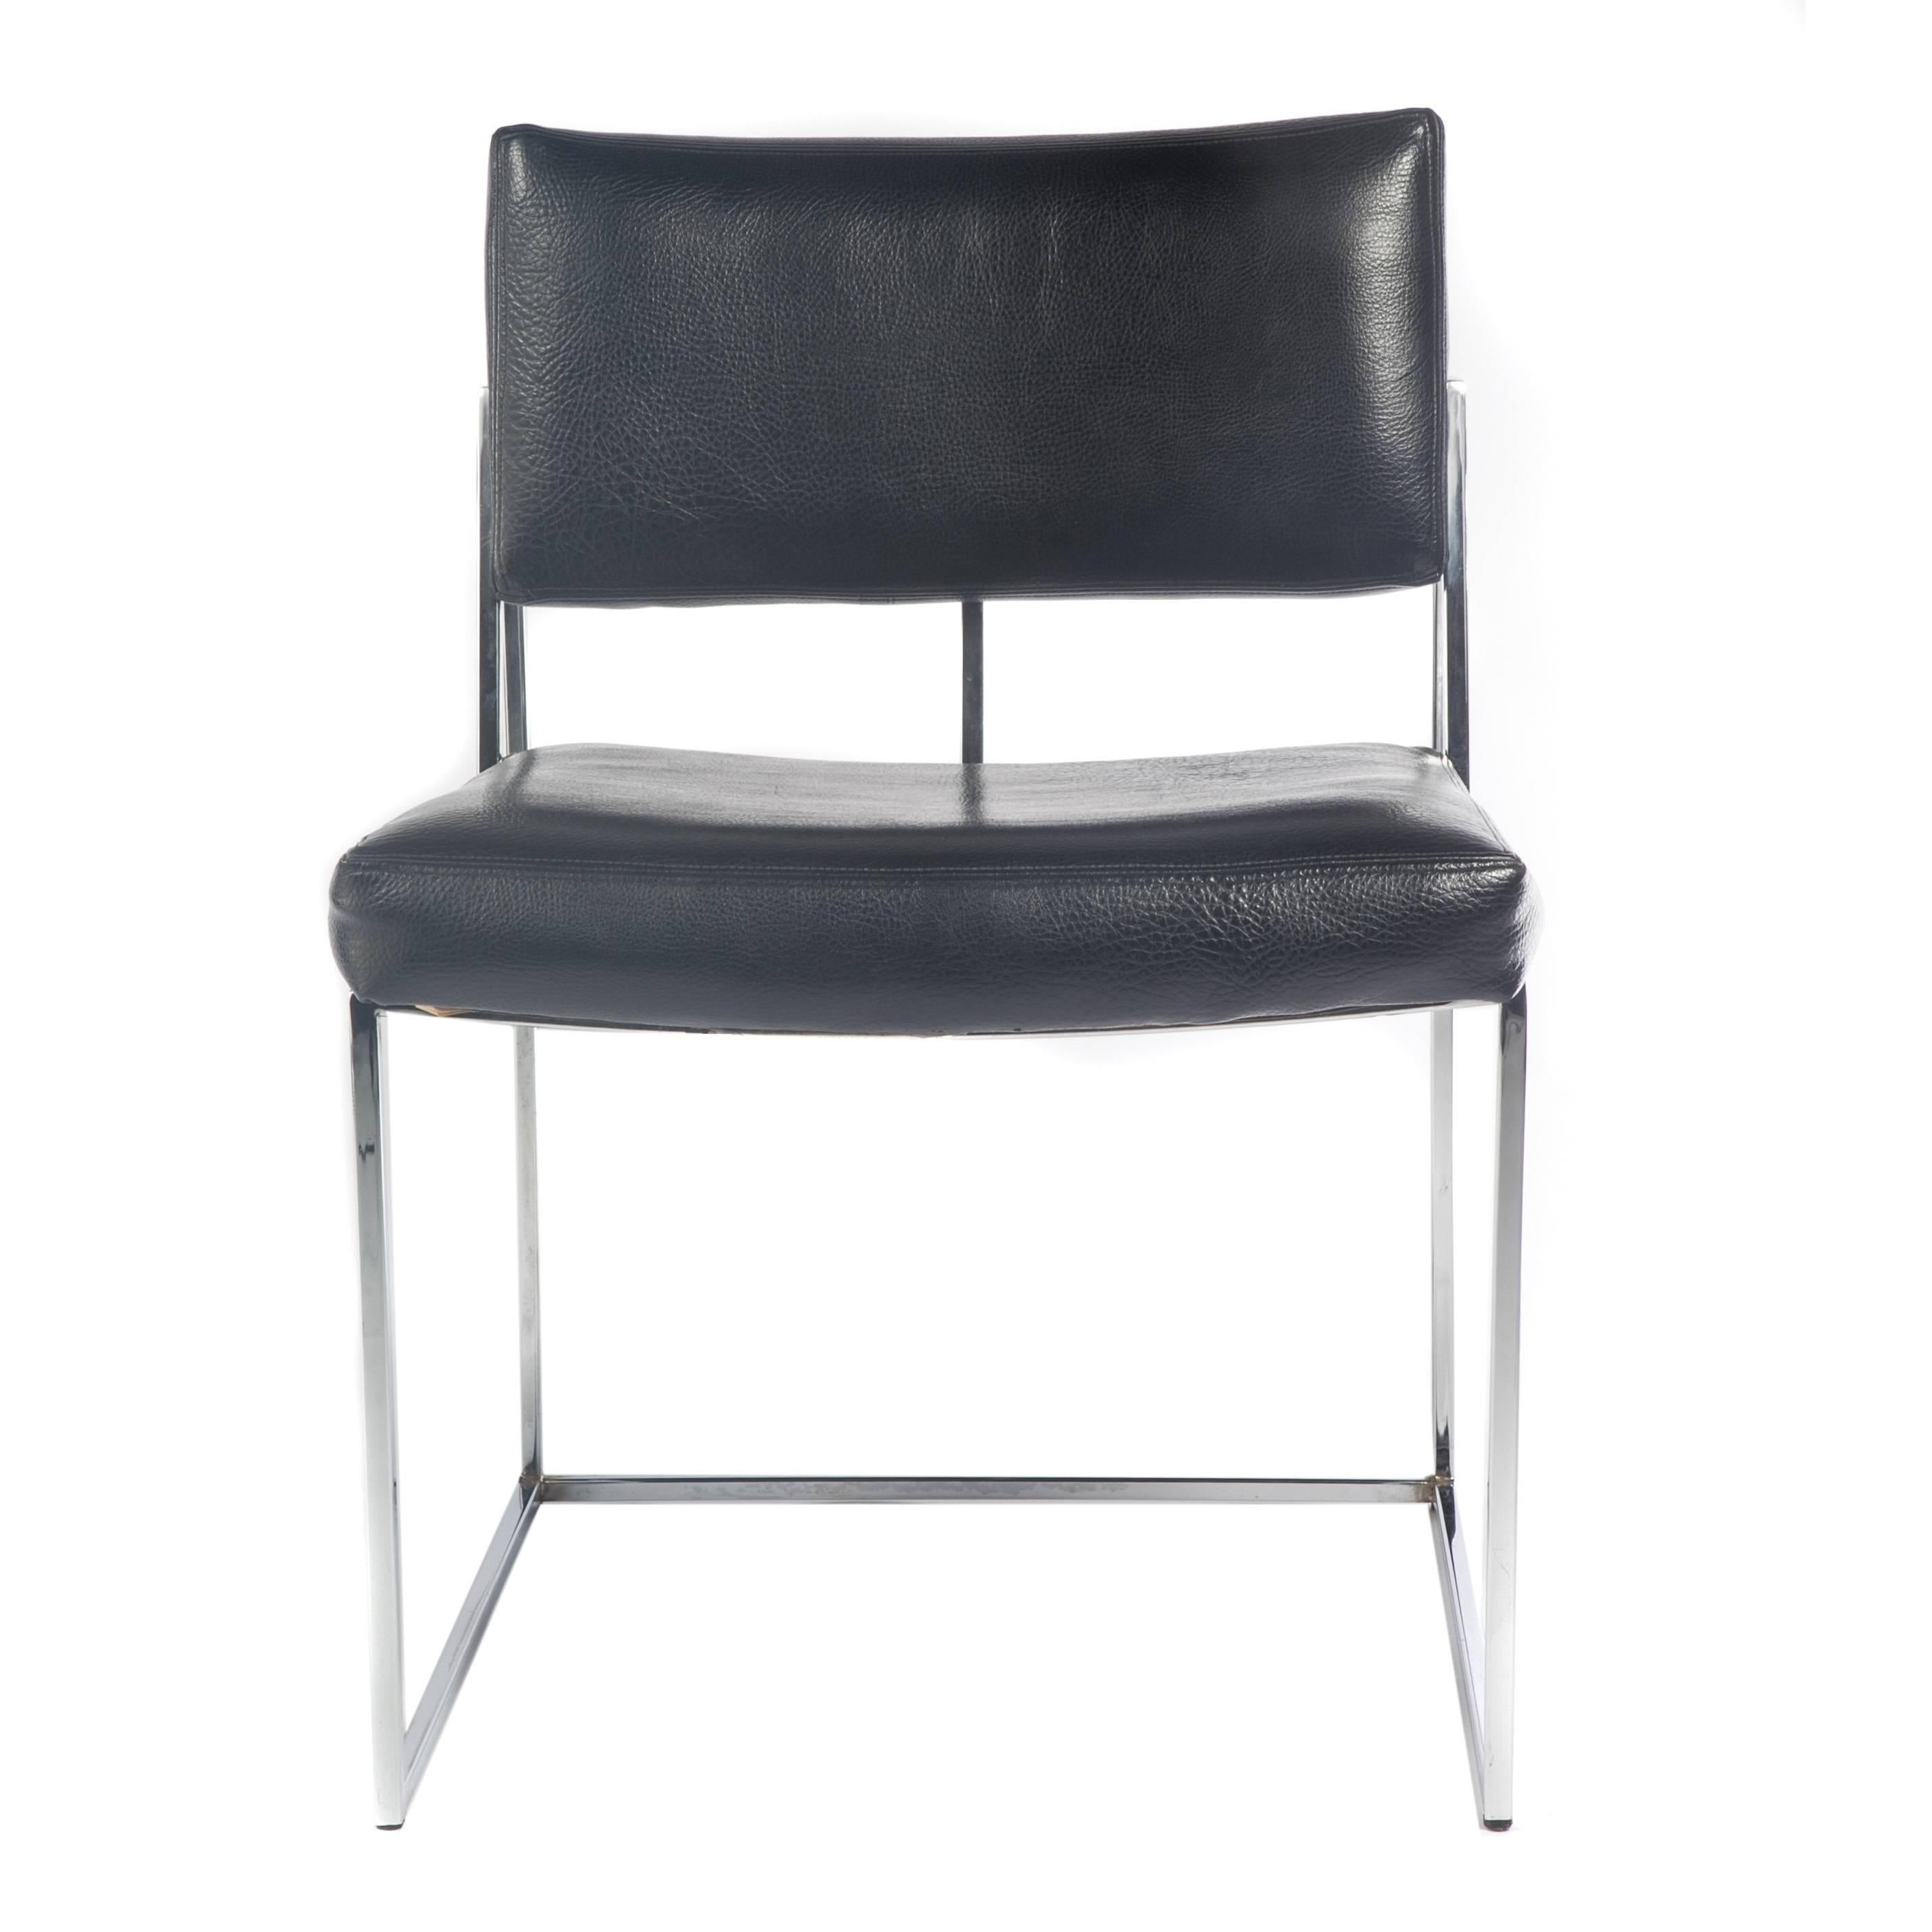 Two Milo Baughman side chairs featuring sturdy polished-chrome frames with seats and backs upholstered in original black vinyl, circa 1970s. Can be used as occasional chairs in a seating group or as dining chairs. Signed with Thayer Coggin tags.